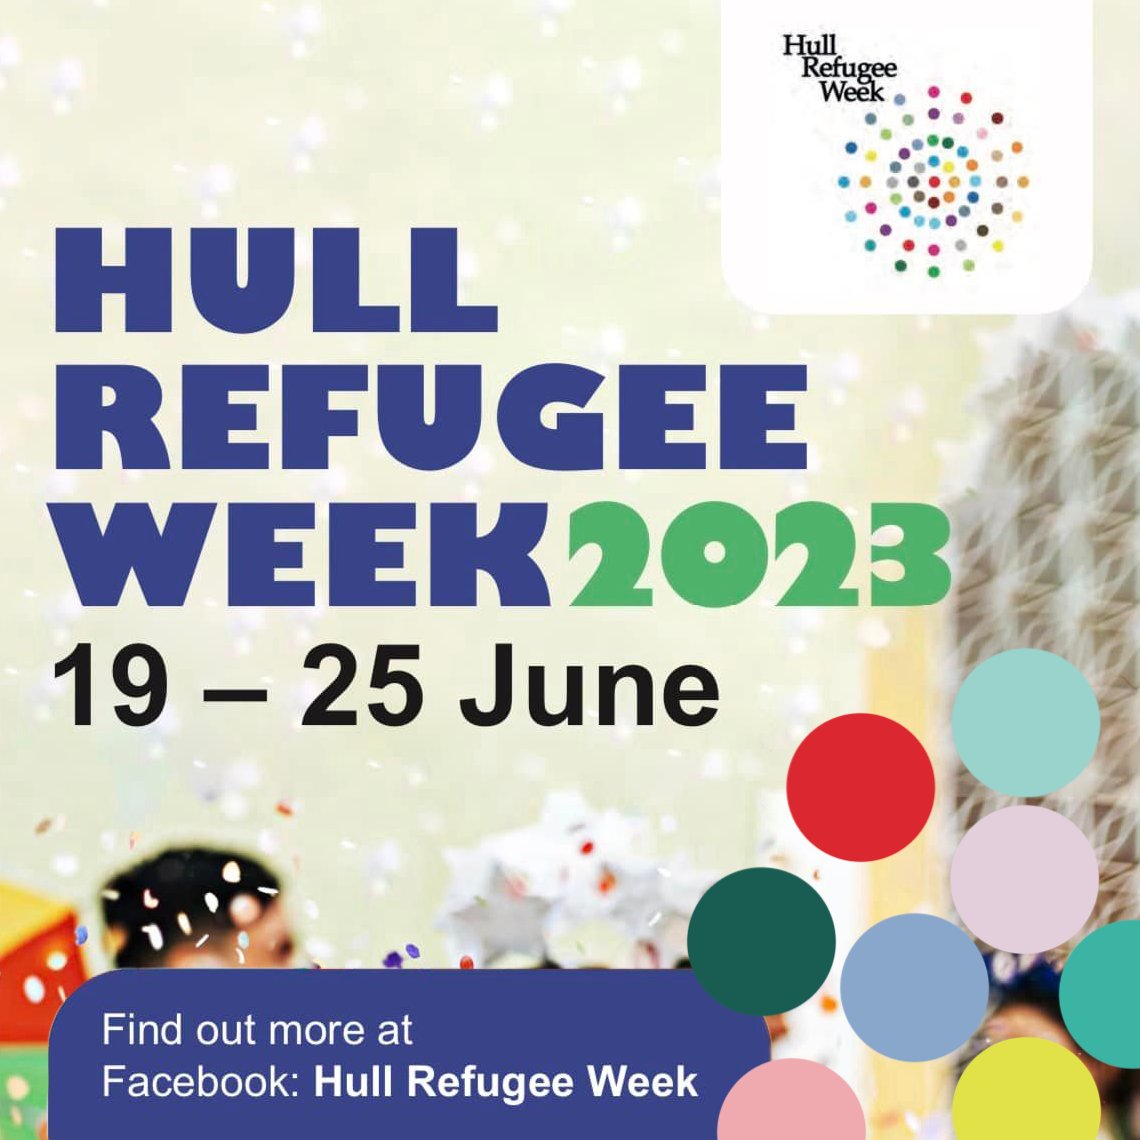 It’s National Refugee Week (19-25 June). You’re invited to get involved in a week-long programme of events in Hull, from exhibitions to community sharing events, conversation cafes and poetry readings. Find out more on Facebook @ hullrefugeeweek.